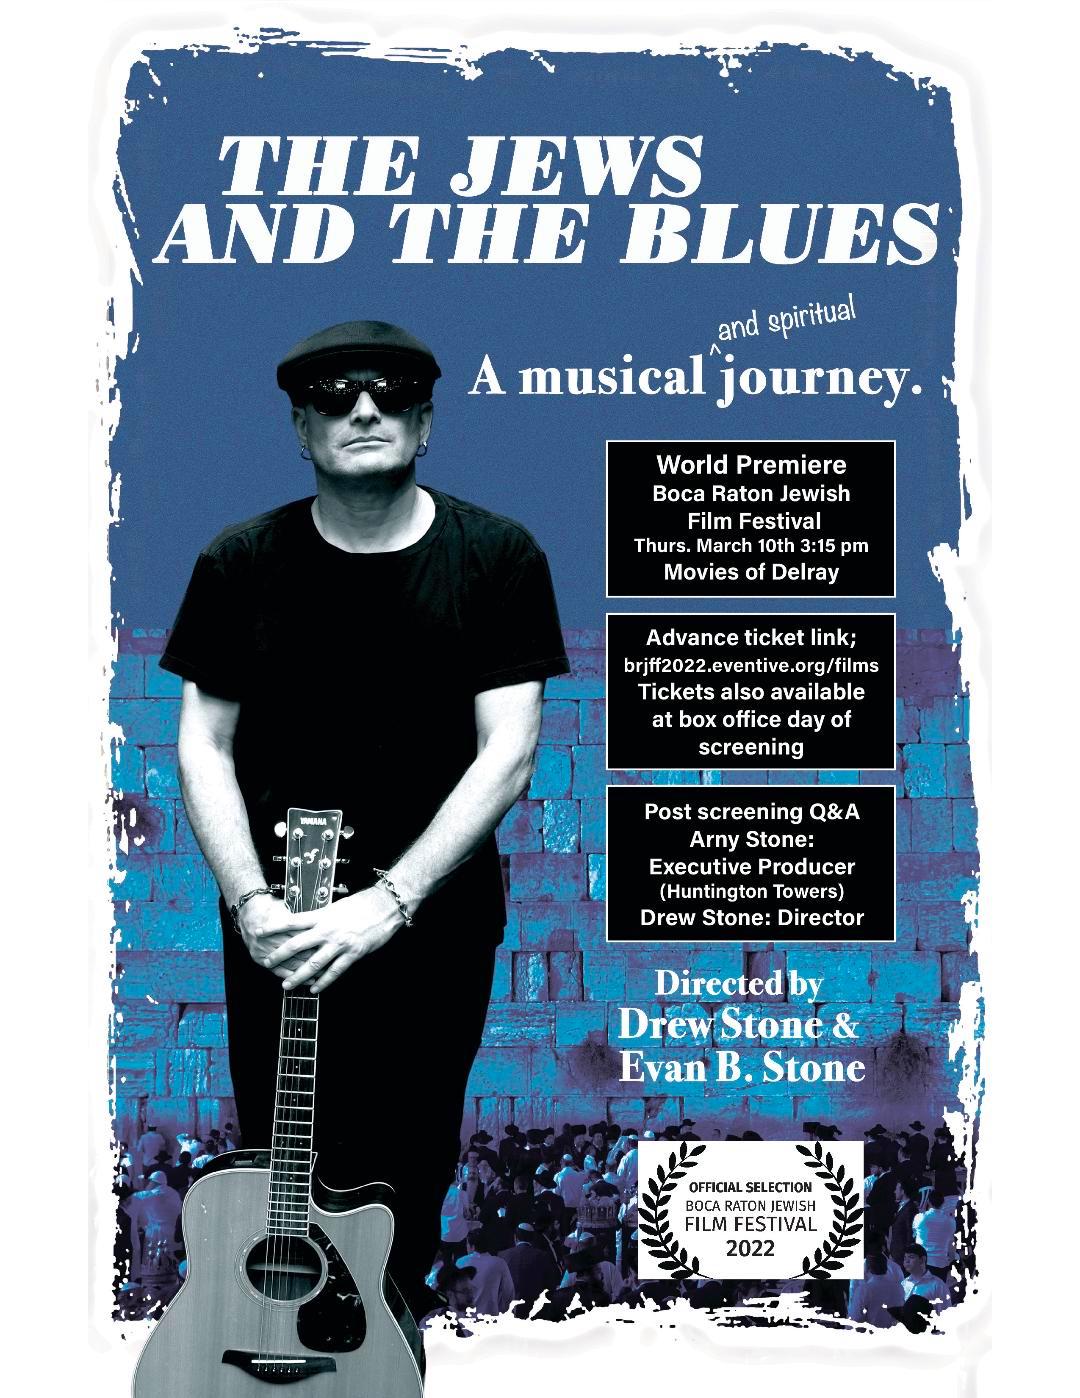 World Premiere of documentary film "The Jews and The Blues" to screen